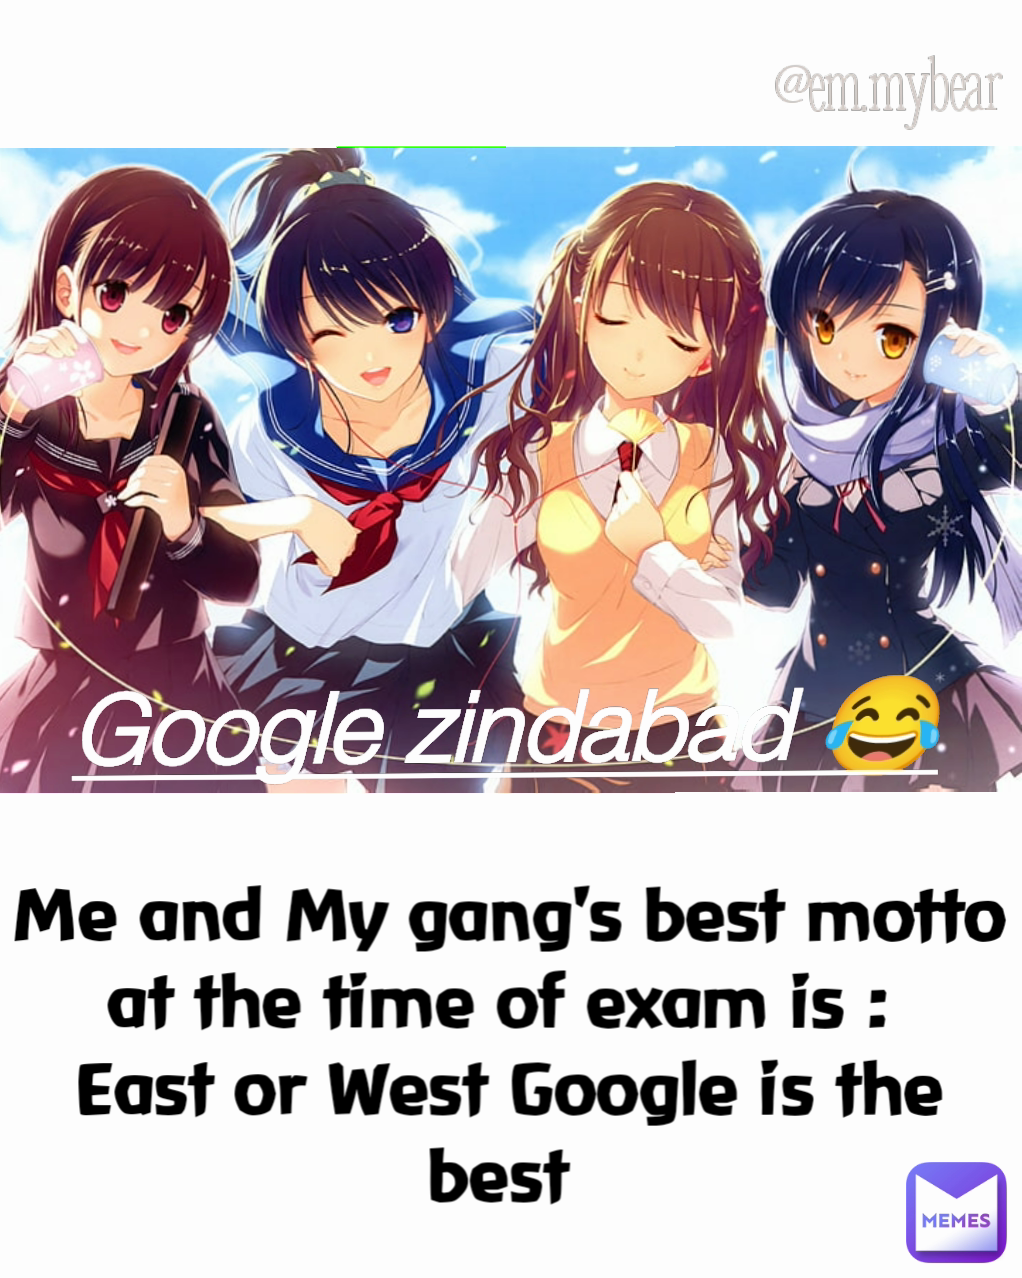 Me and My gang's best motto at the time of exam is : East or West Google is  the best Google zindabad 😂 @ | @ssukiebby | Memes